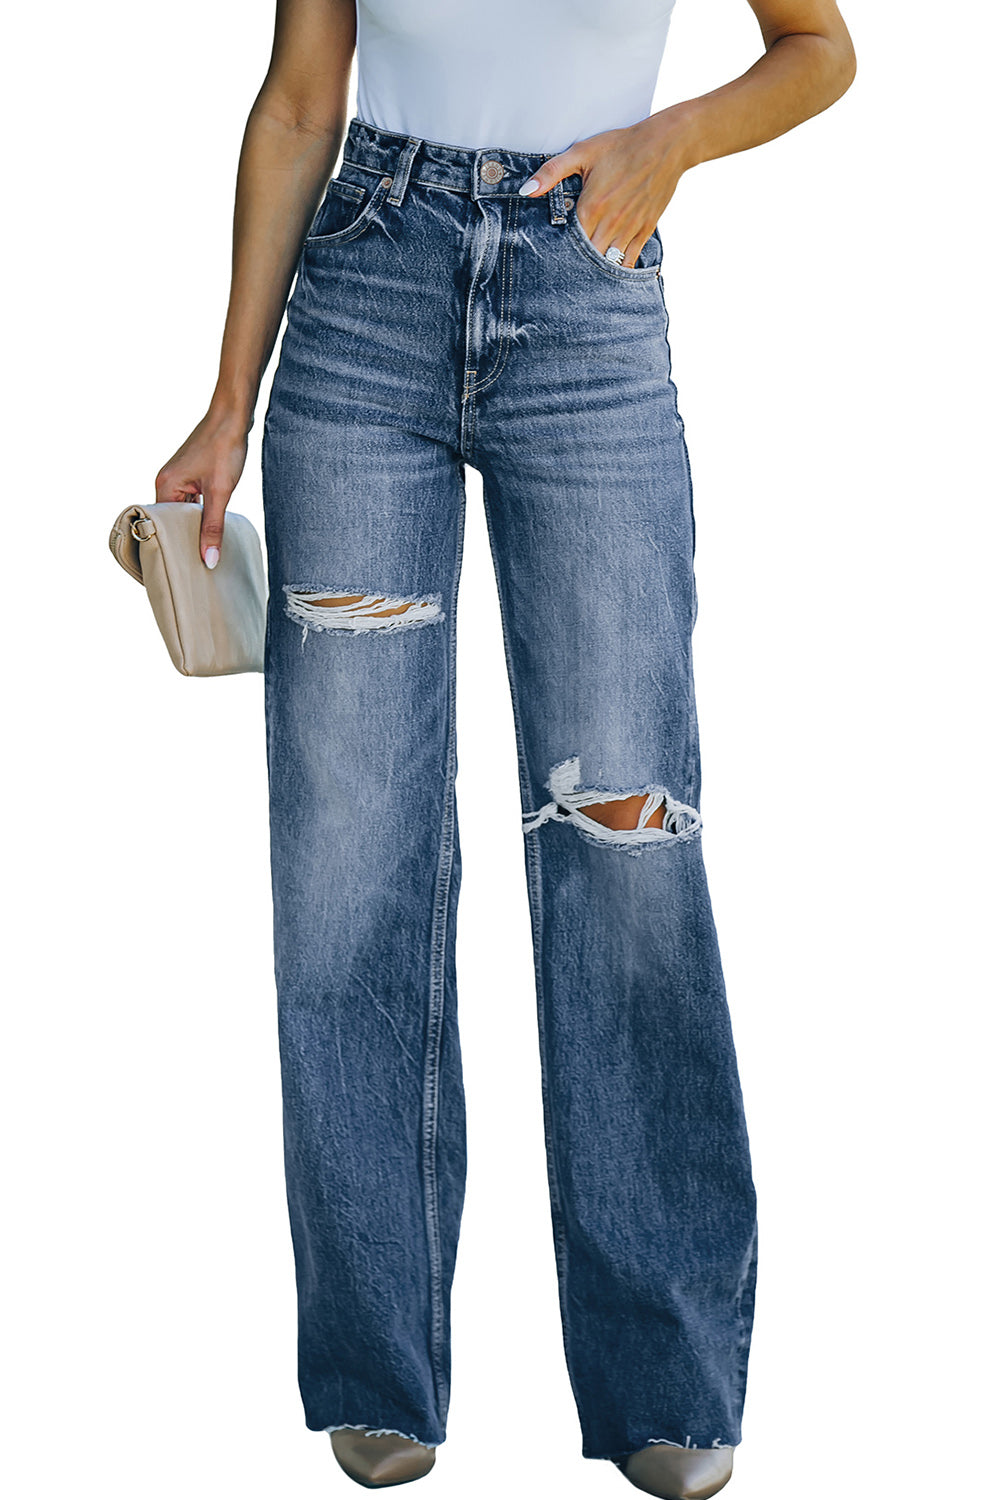 Sky Blue High Rise Ripped Straight Legs Loose Jeans Jeans JT's Designer Fashion